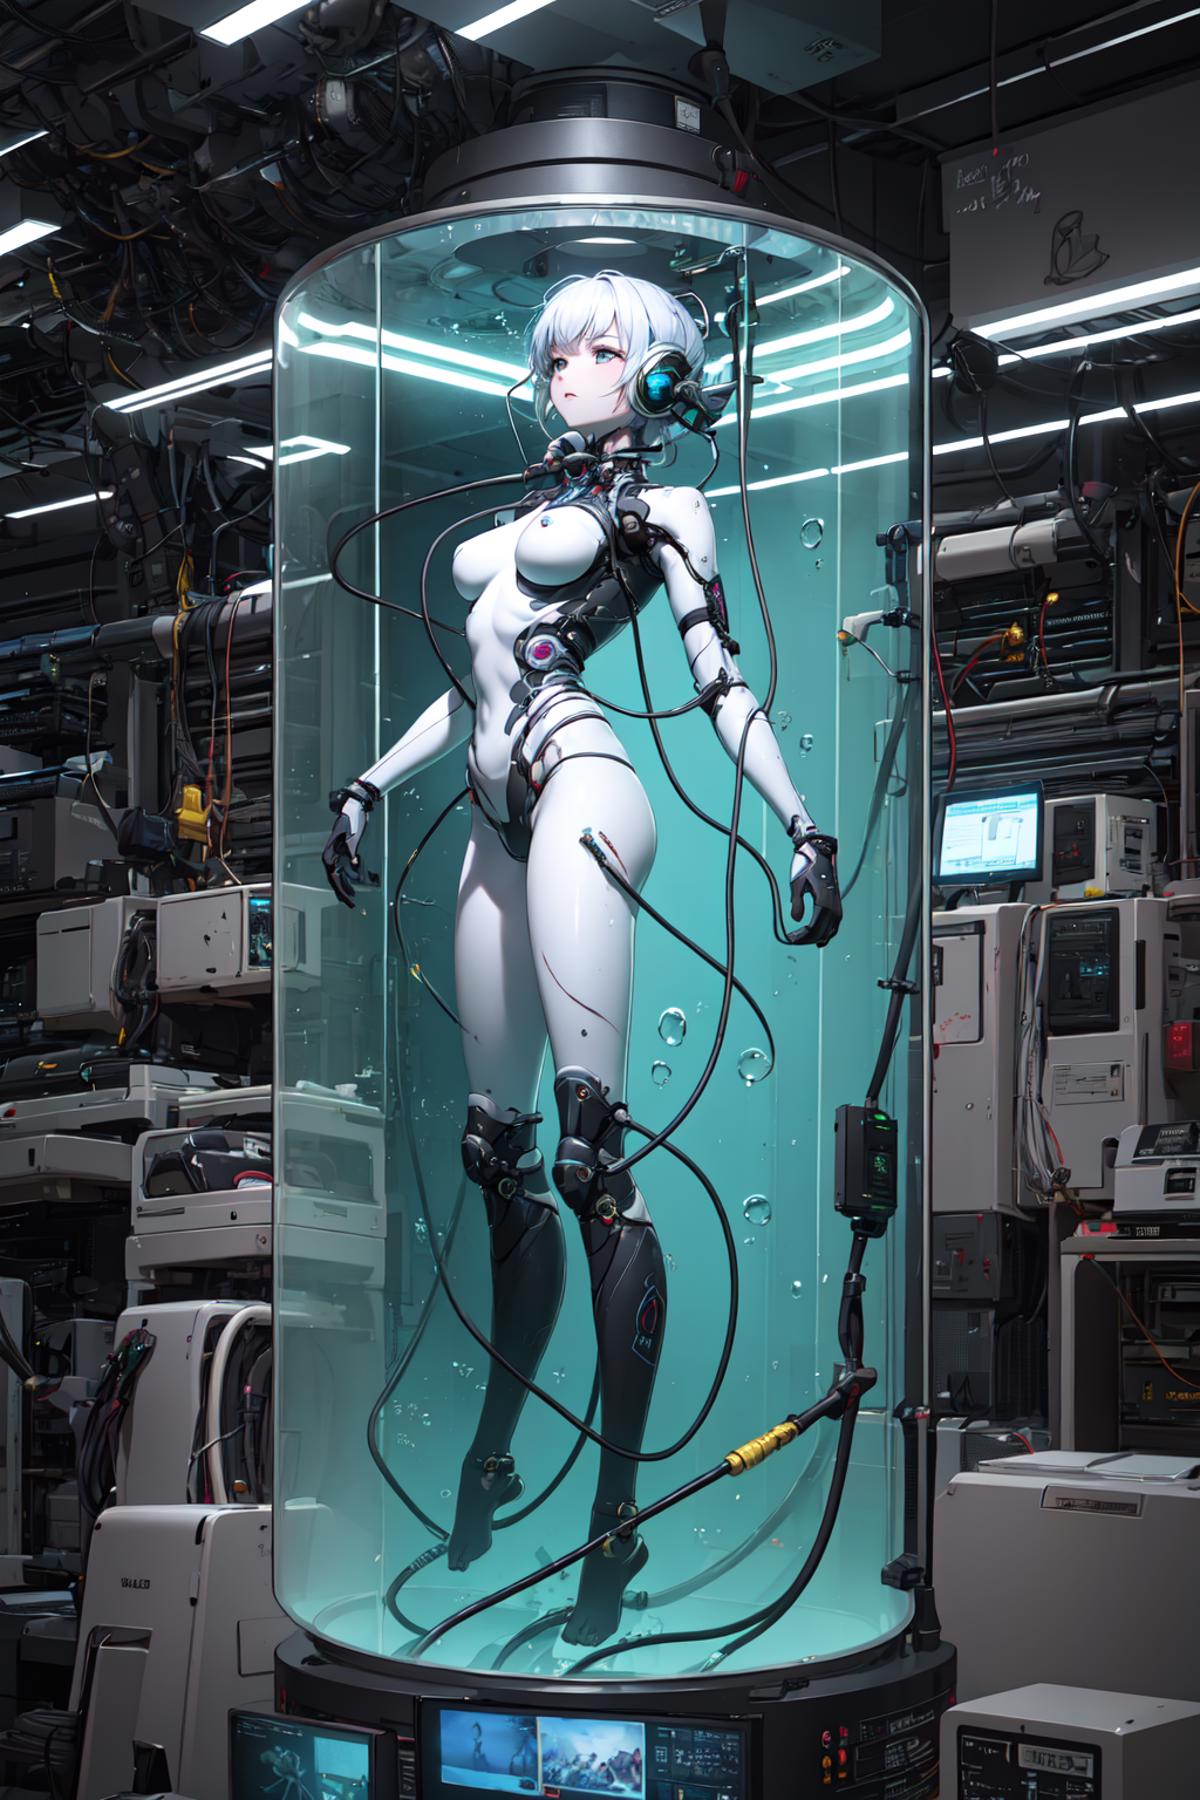 A statue of a robot woman in a glass case, surrounded by electronic equipment.